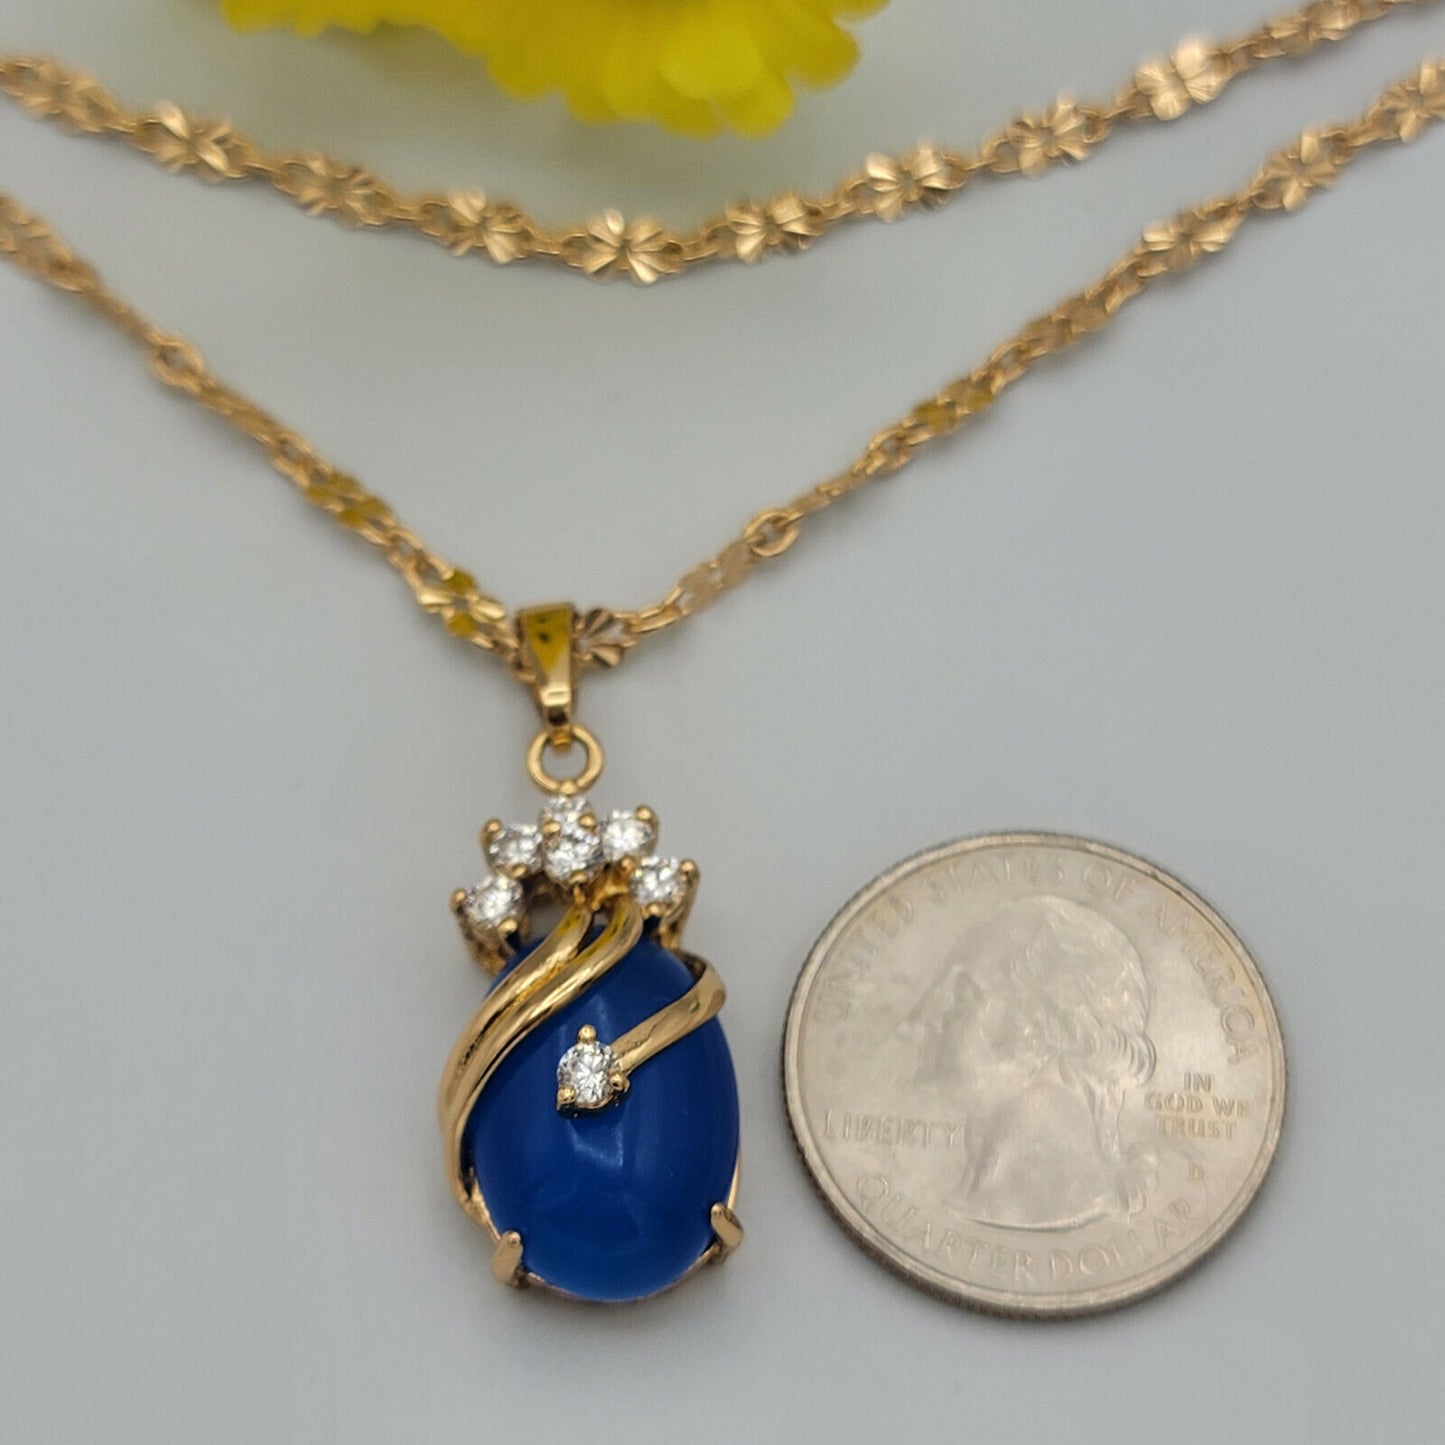 Necklaces - 18K Gold Plated. Blue Crystal Drop Pendant & Chain.